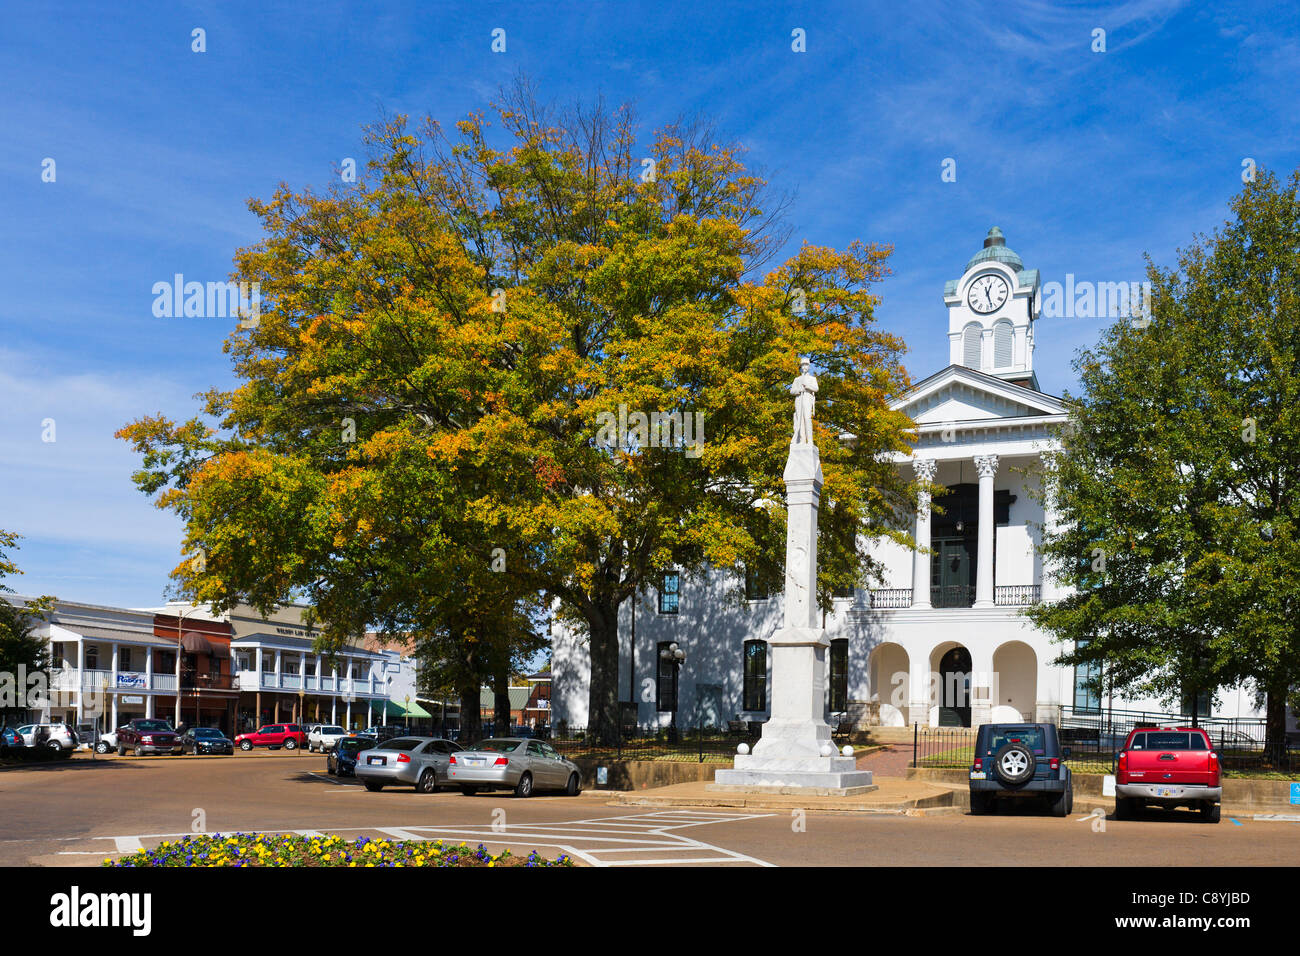 The Courthouse, Courthouse Square in historic downtown Oxford